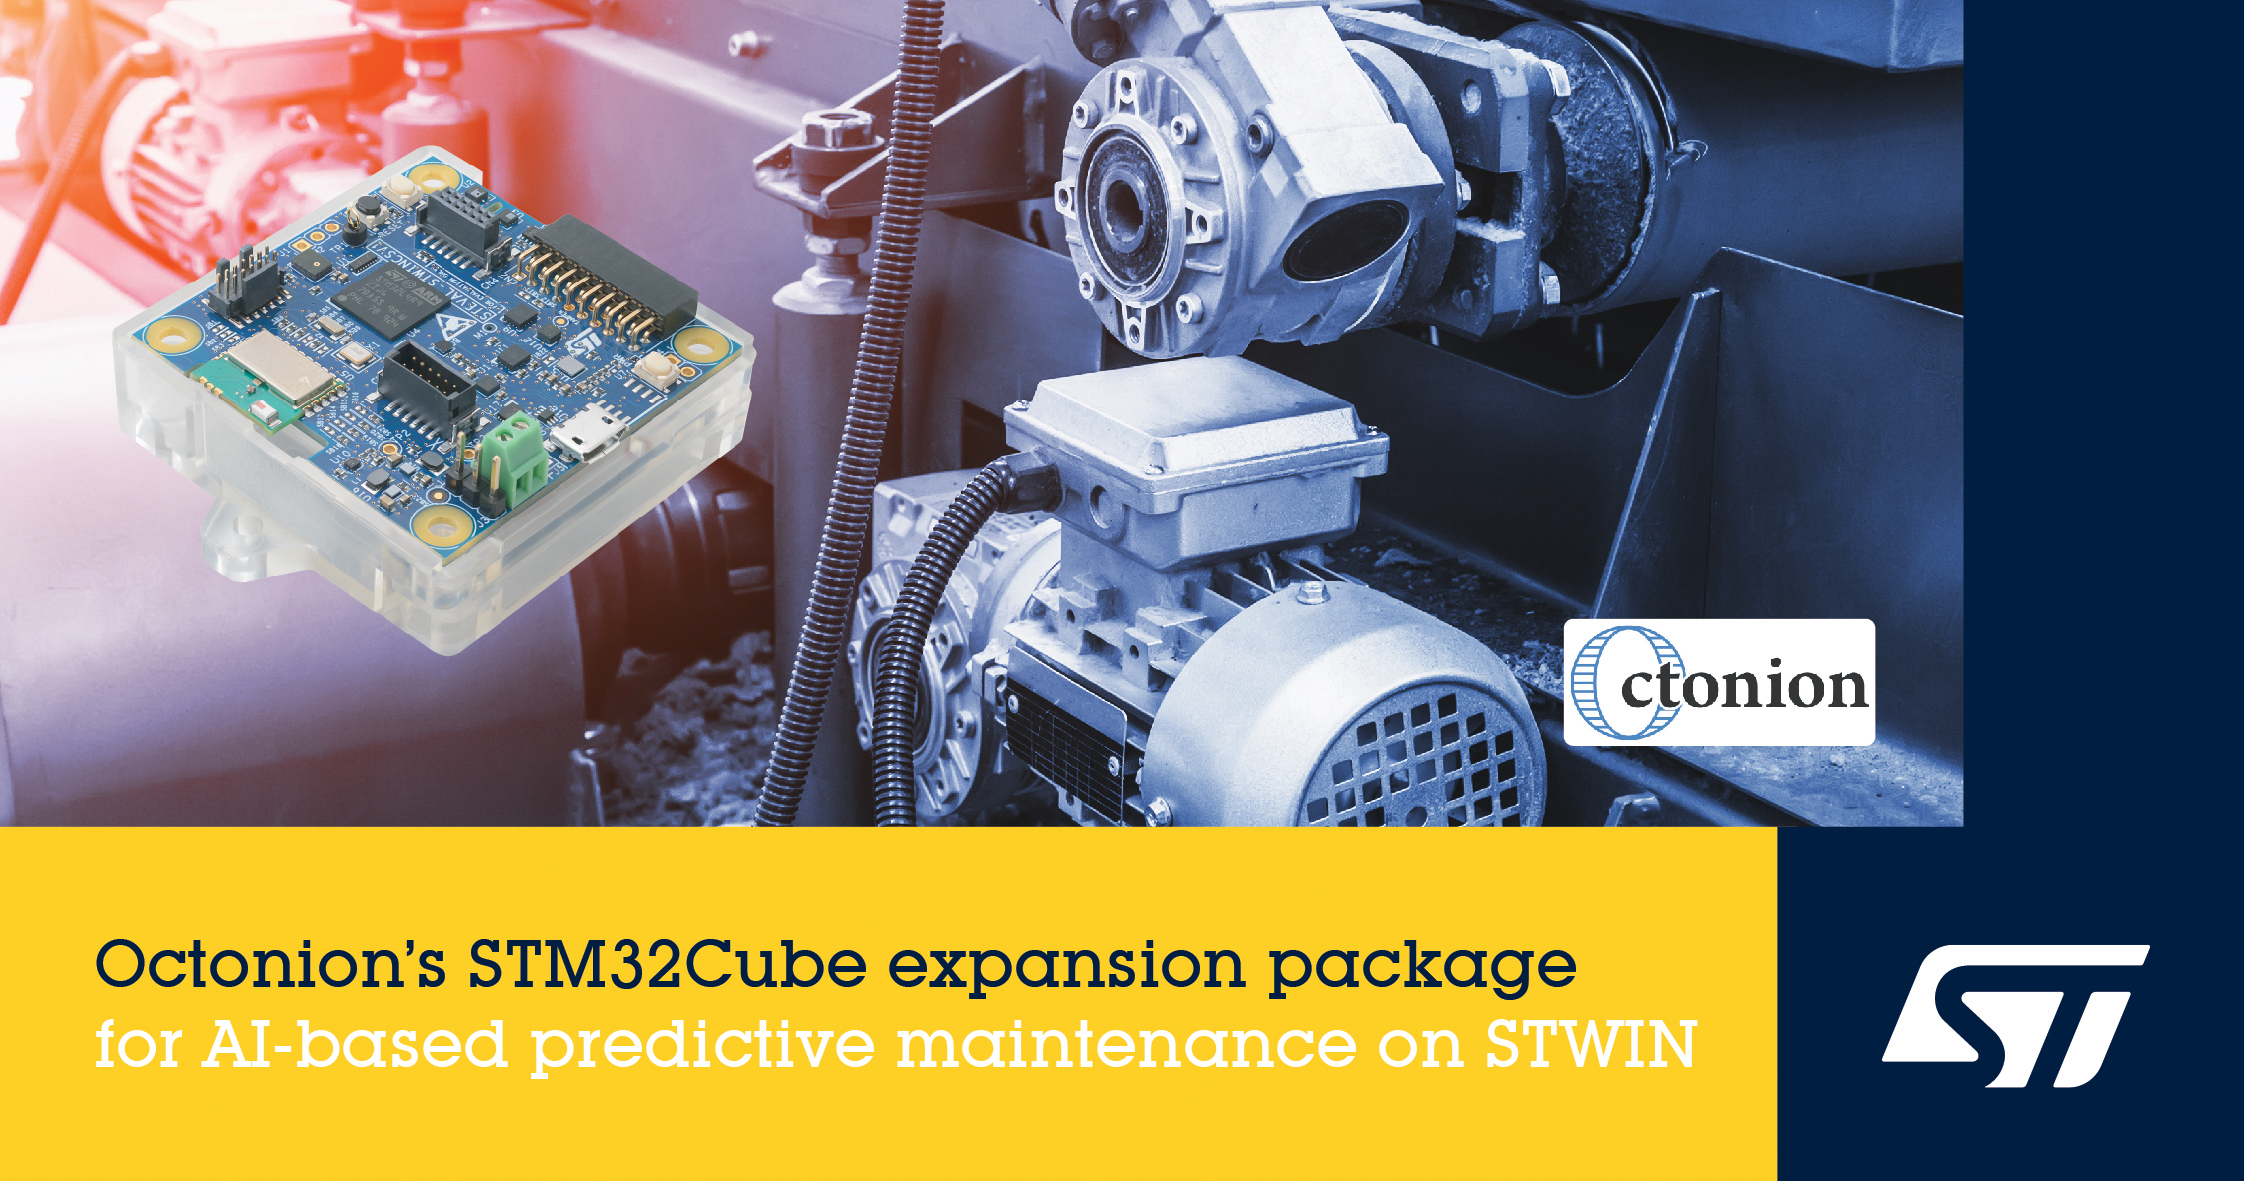 Octonion Releases Expansion Package Dedicated to AI-Based Industrial Condition Monitoring on STMicroelectronics STM32 MCUs